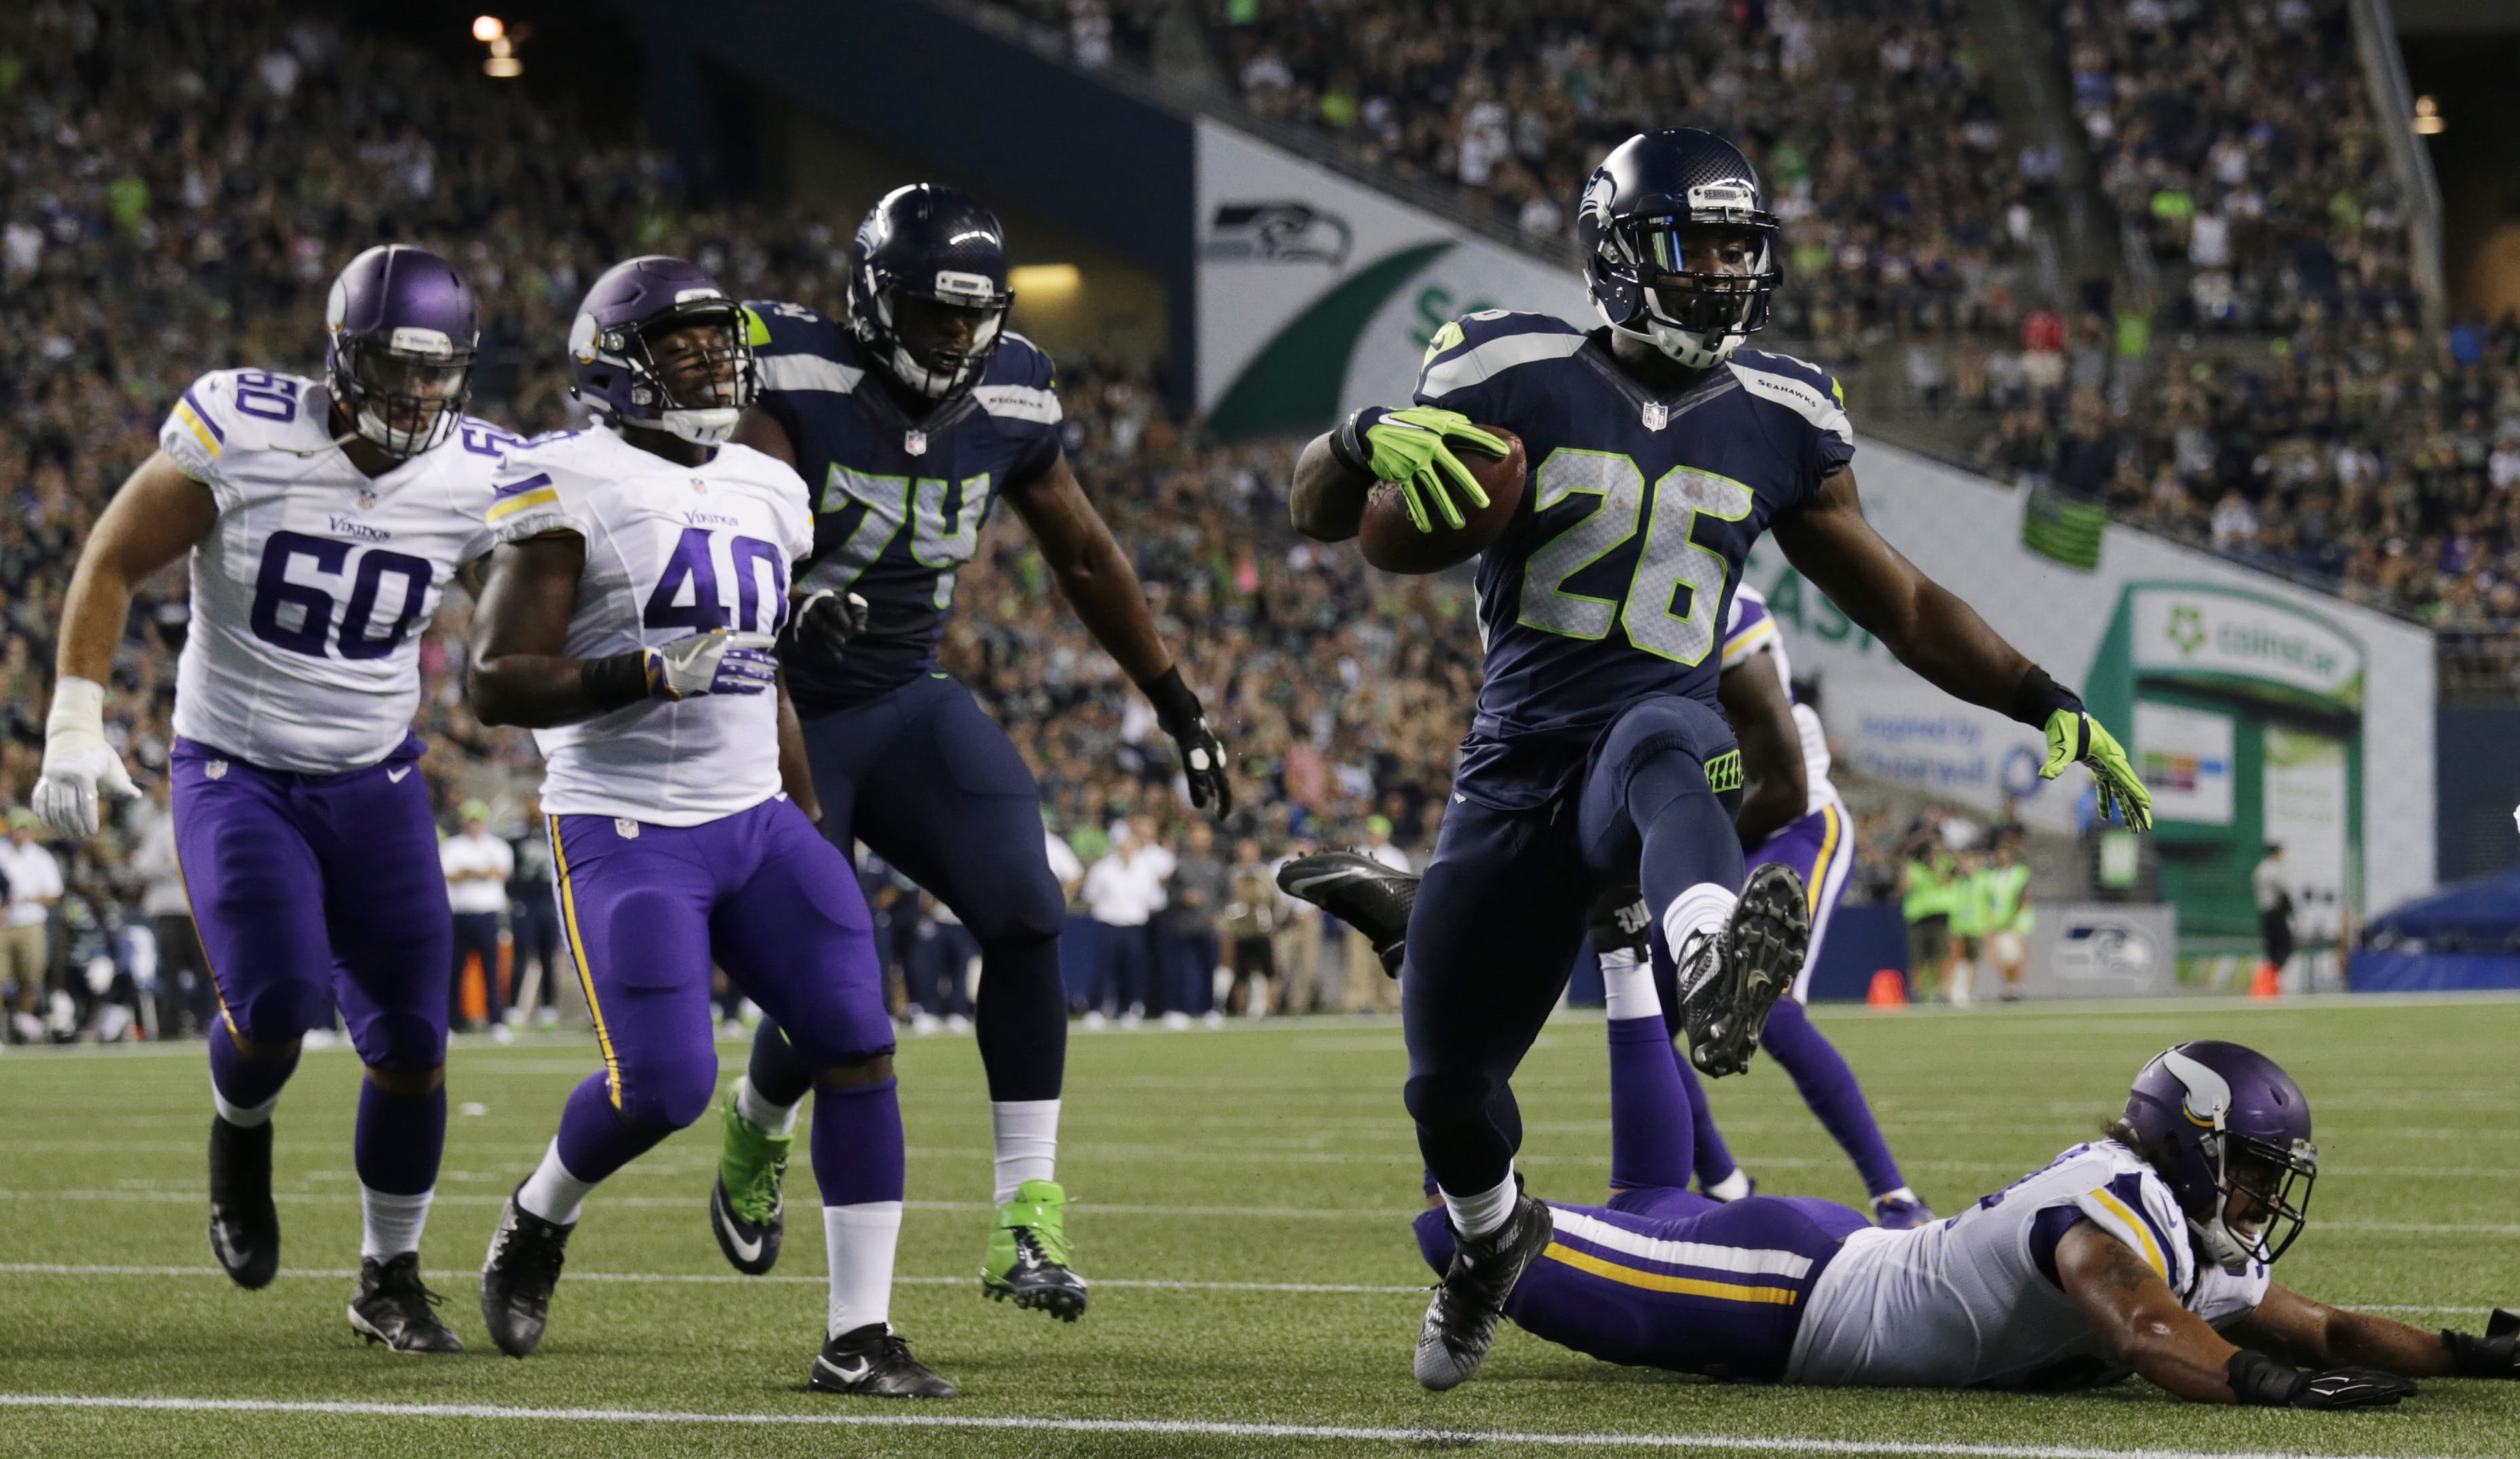 Seattle Seahawks running back Troymaine Pope (26) scores a touchdown against the Minnesota Vikings during the second half of a preseason NFL football game Thursday, Aug. 18, 2016, in Seattle.